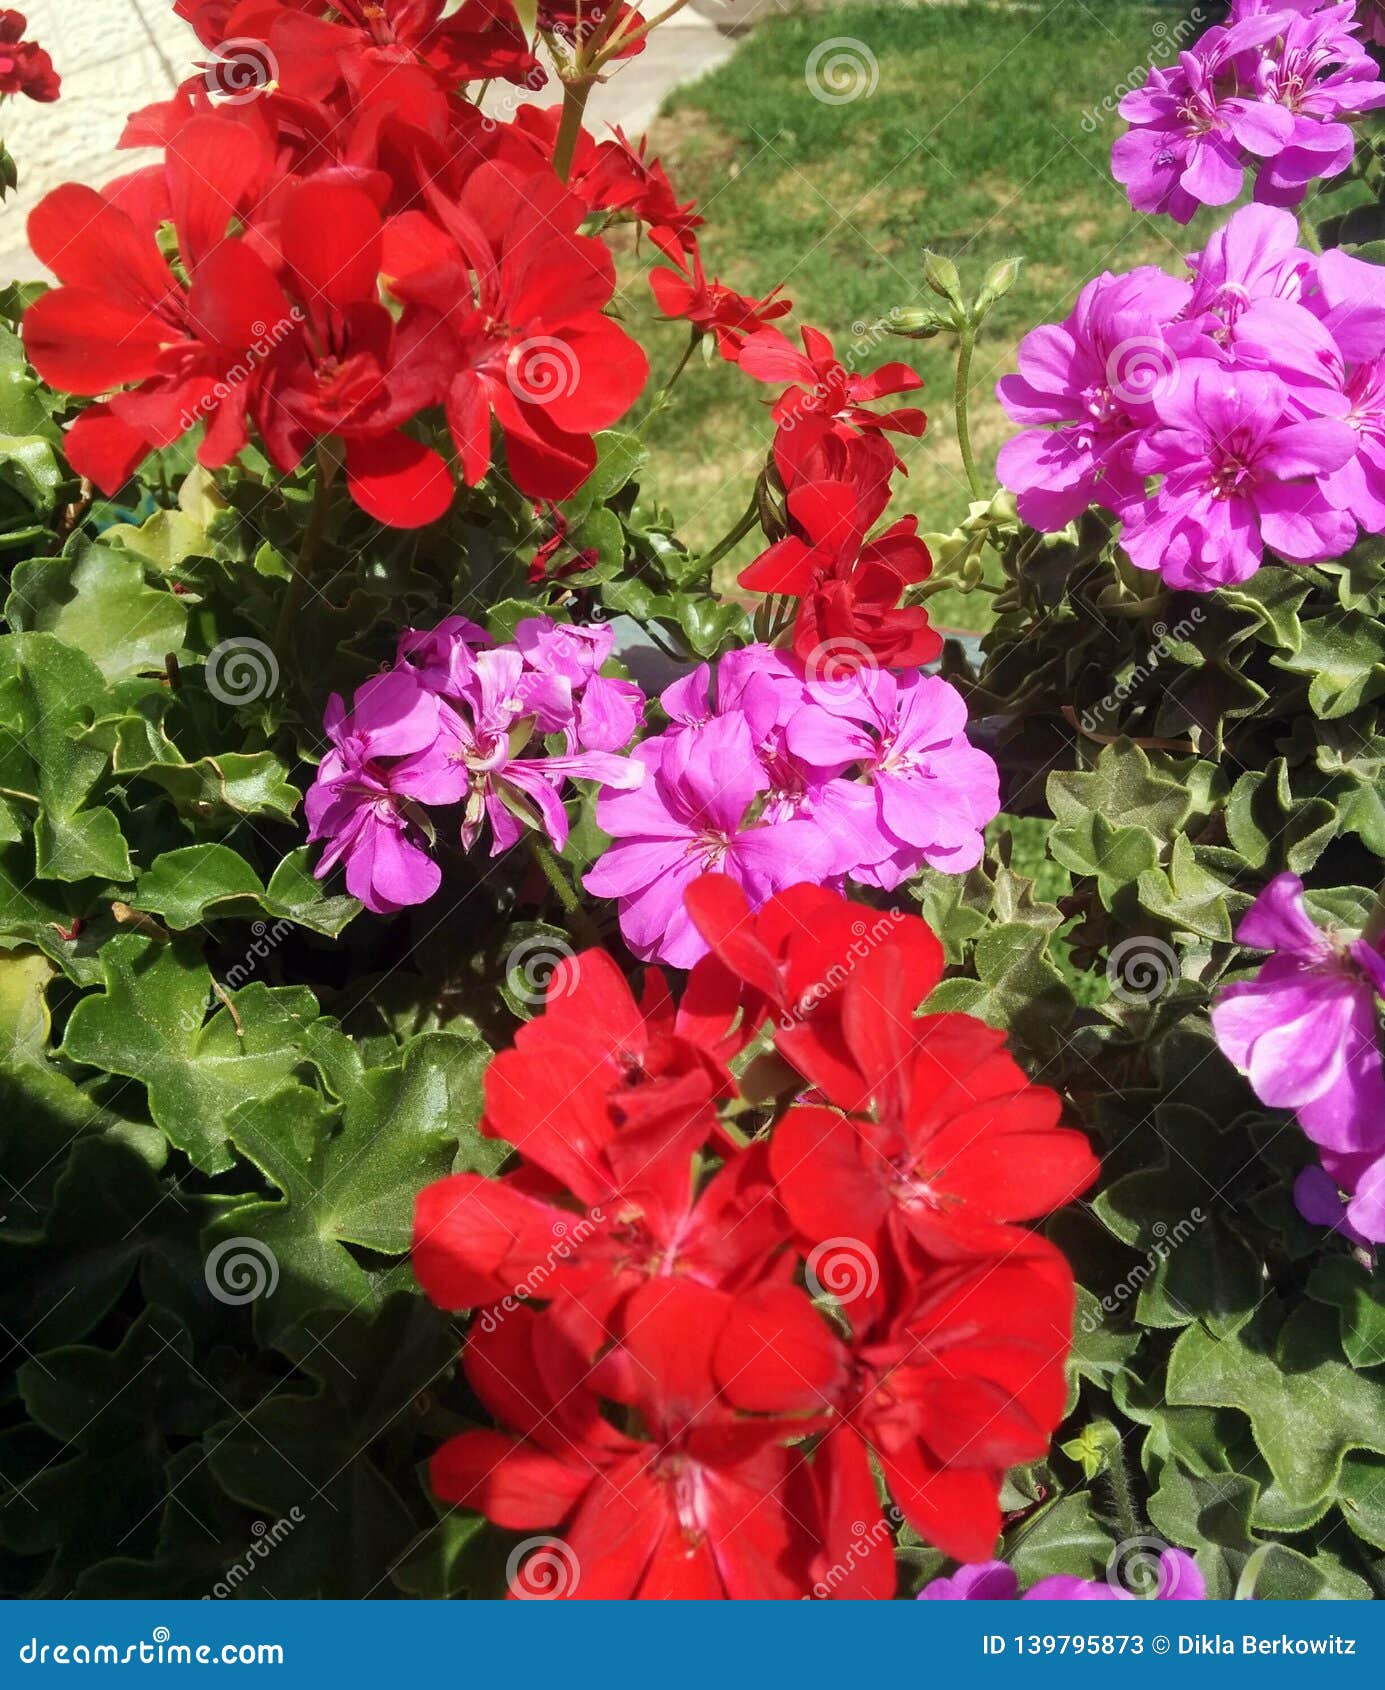 Red and Pink Flowers with Green Leaves. Stock Image - Image of bloom ...